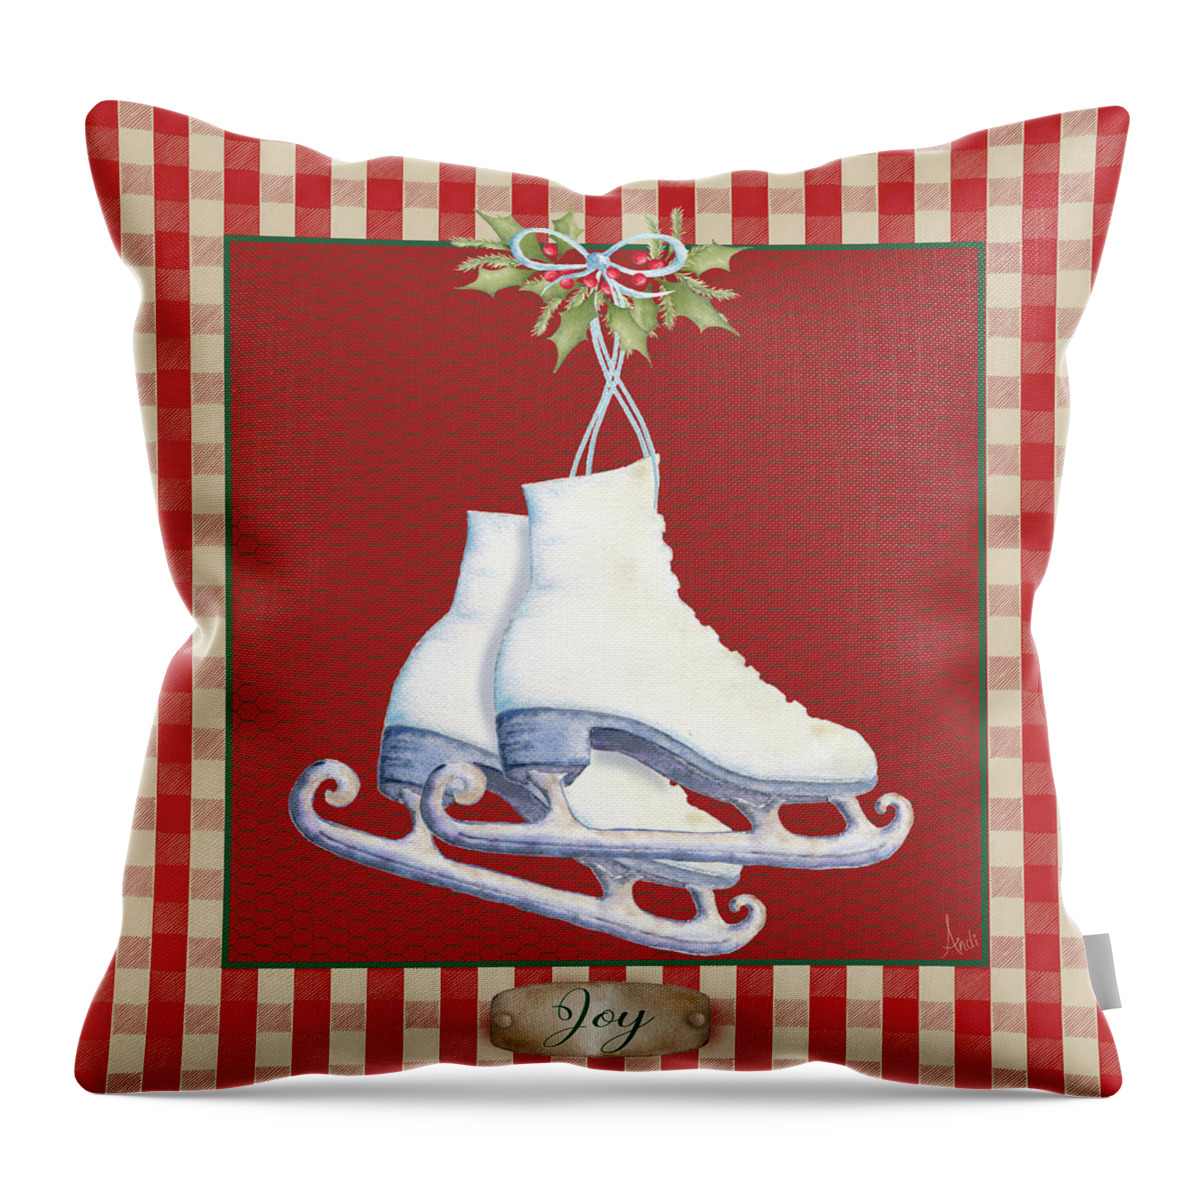 Hometown Throw Pillow featuring the painting Hometown Christmas IIi by Andi Metz